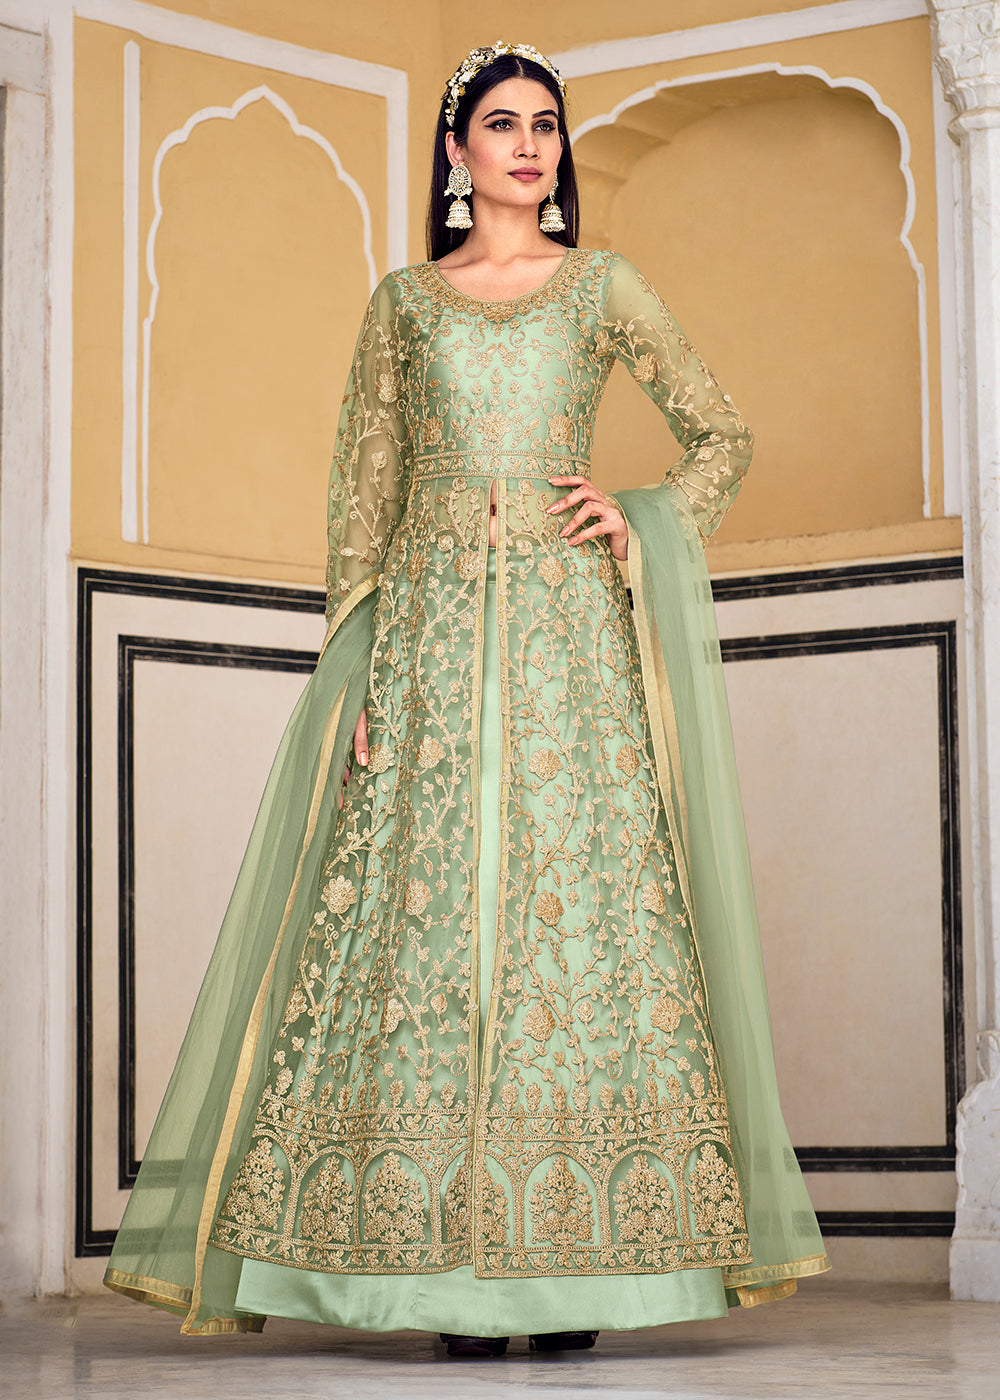 Typical Indian Style Wedding Dresses